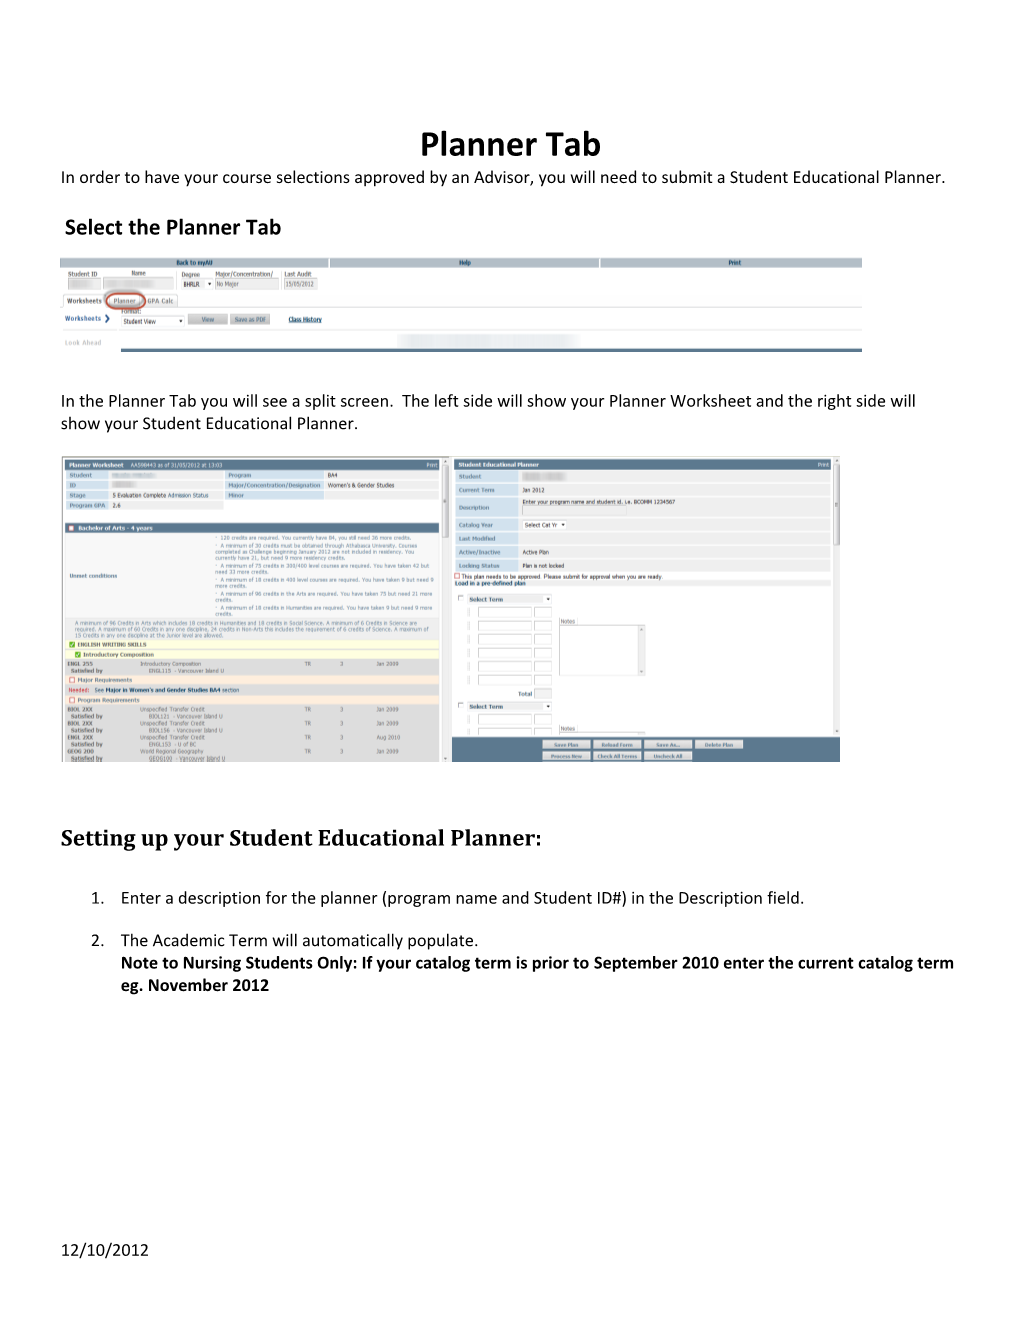 Setting up Your Student Educational Planner